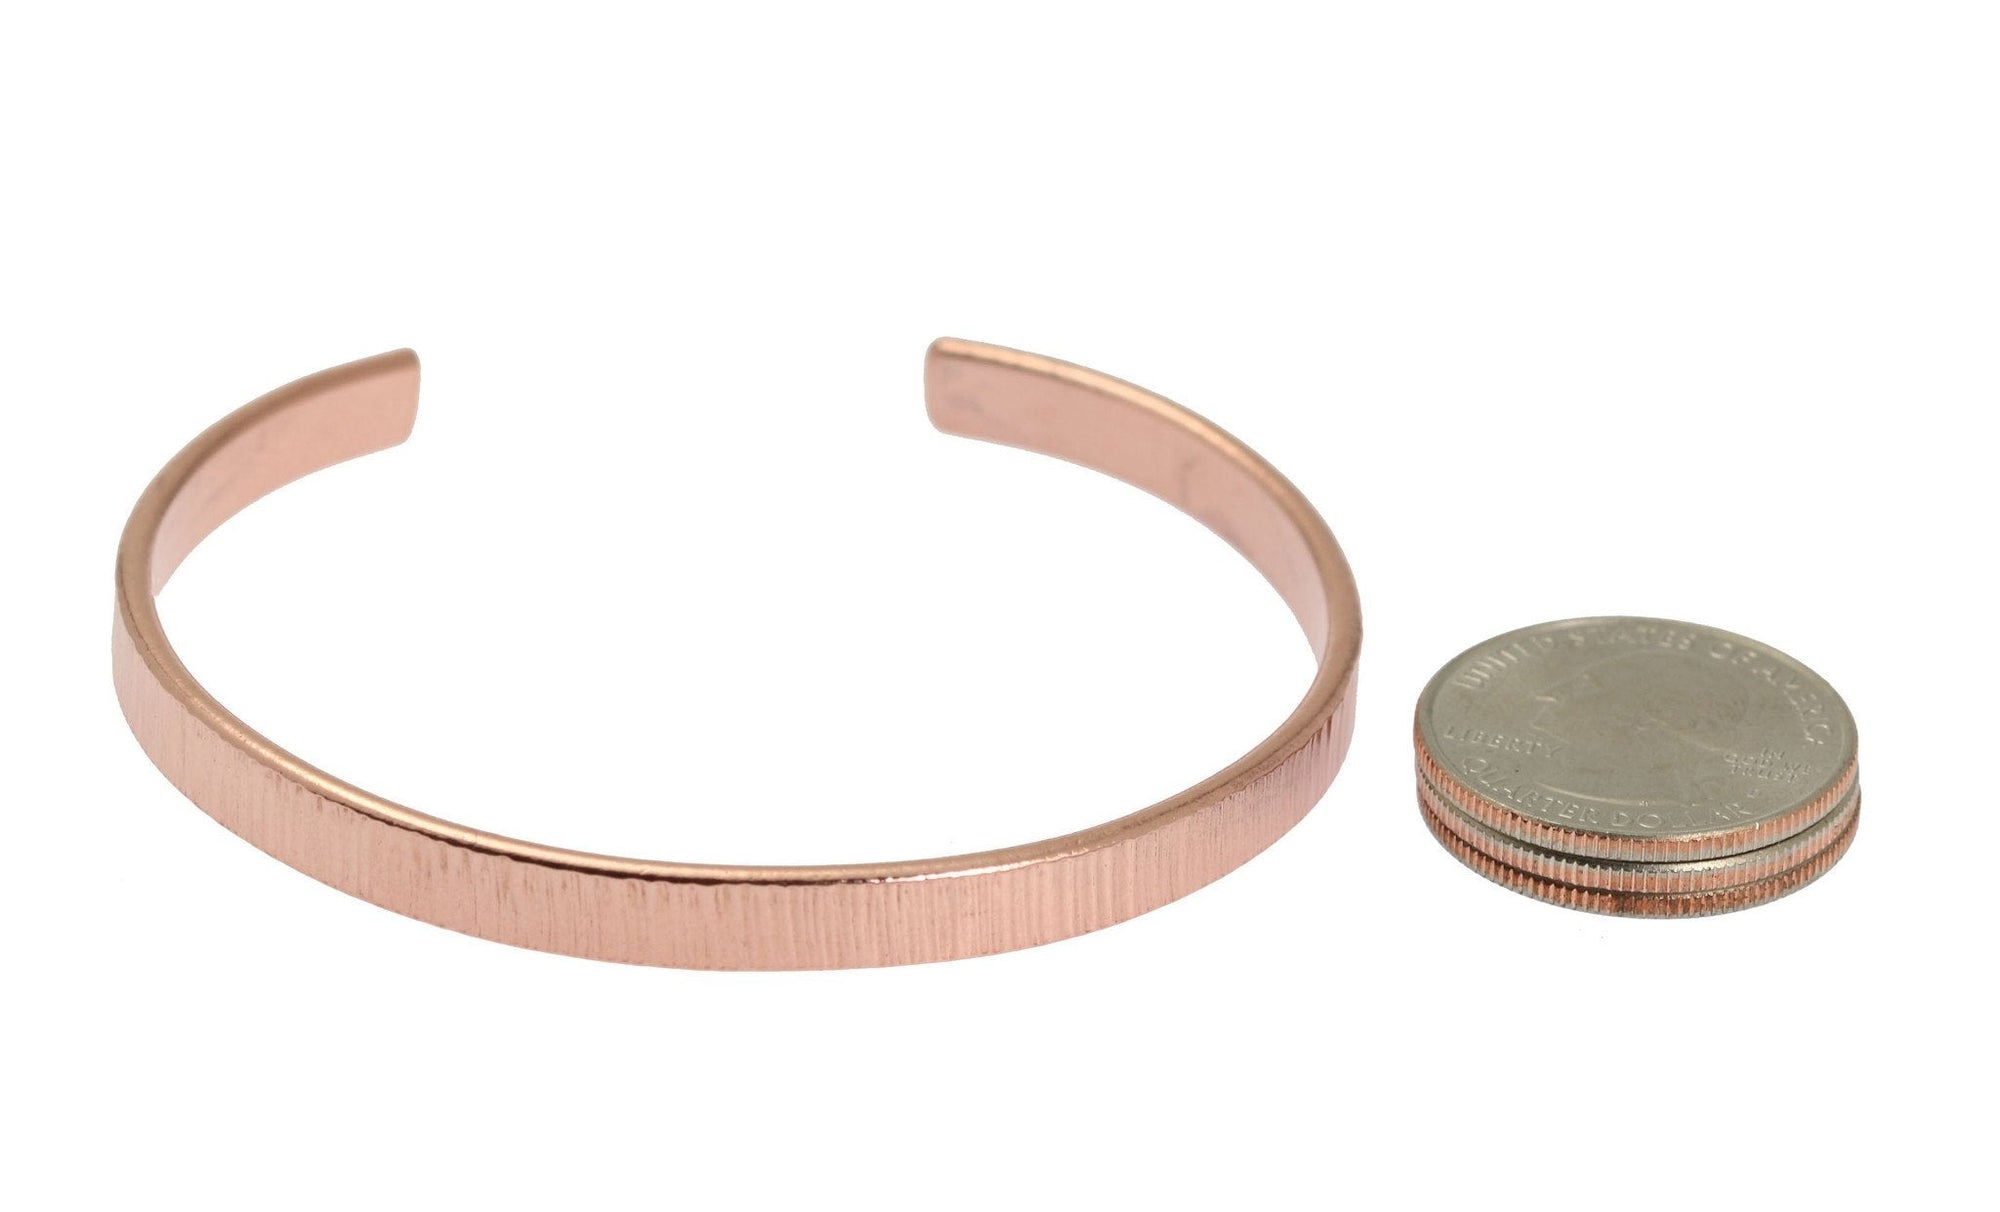 Thickness of Chased Thin Copper Cuff Bracelet